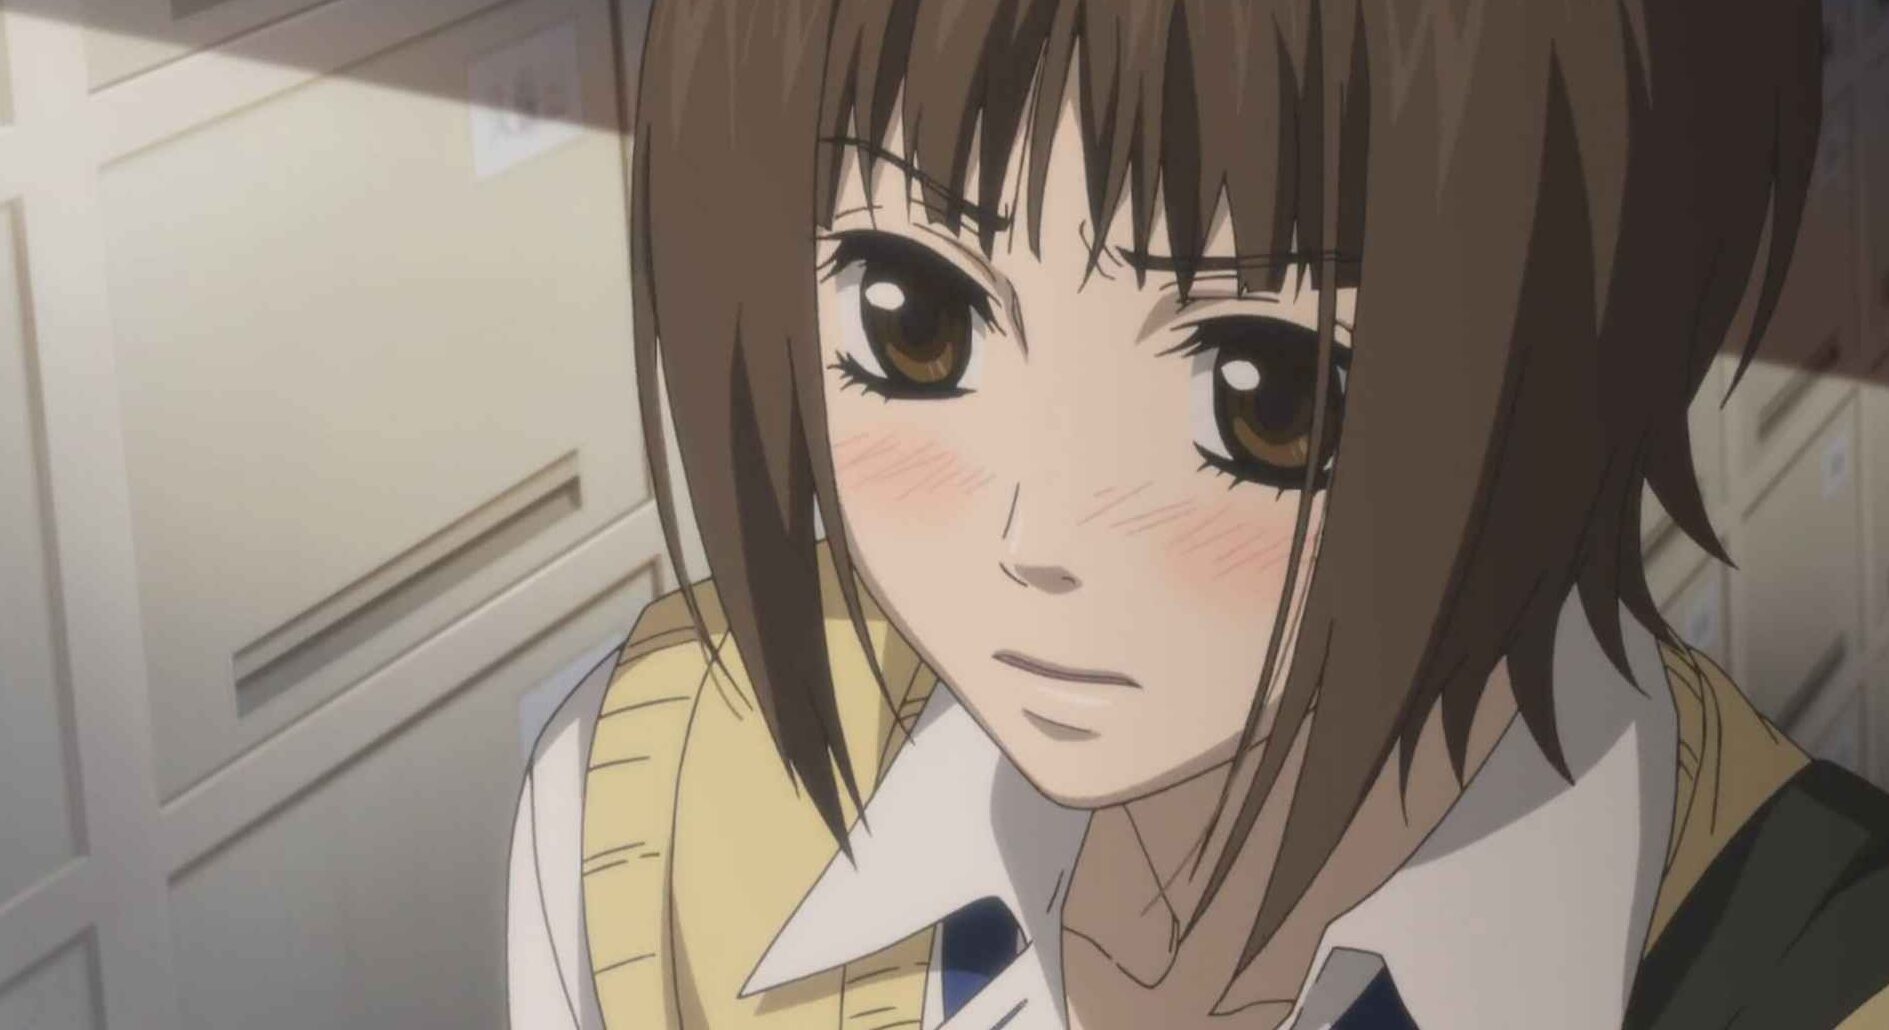 Mei Tachibana from Say "I Love You", is the silent type